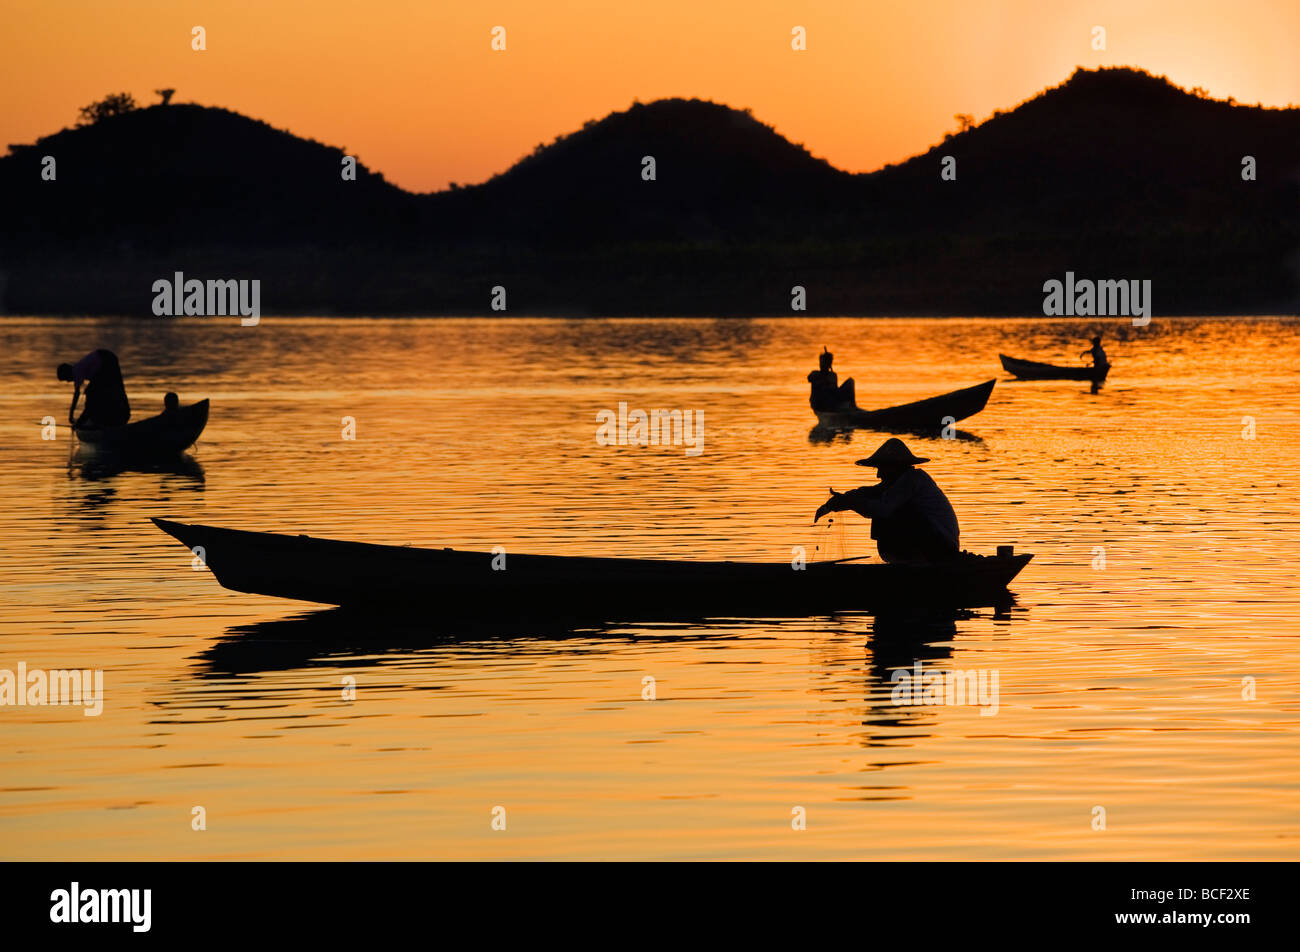 Fishermen bathed in the golden hues of the setting sun as they fish from their little boats on the Lay Myo River. Stock Photo